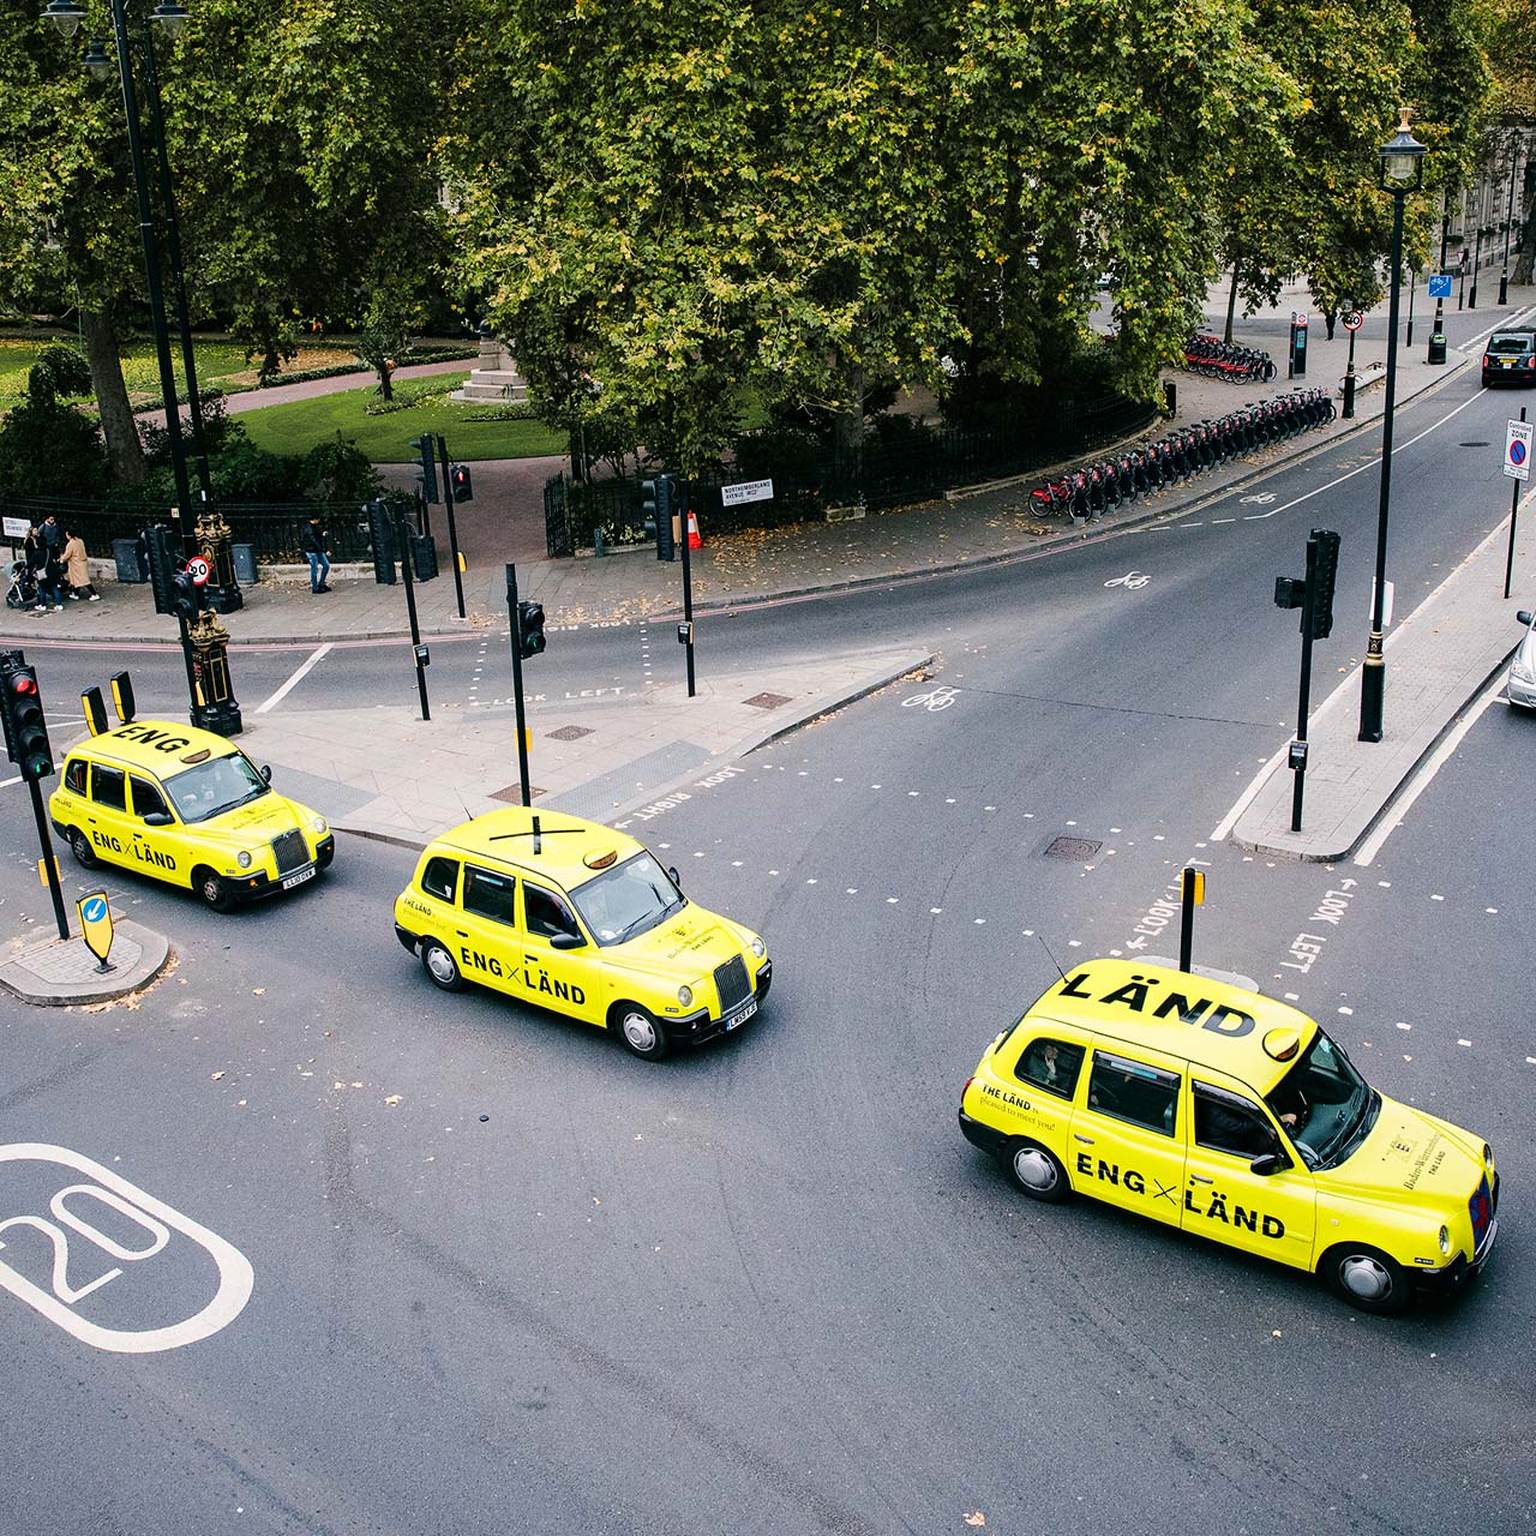 Three neon yellow cabs with "LÄND" lettering are driving through streets of england.